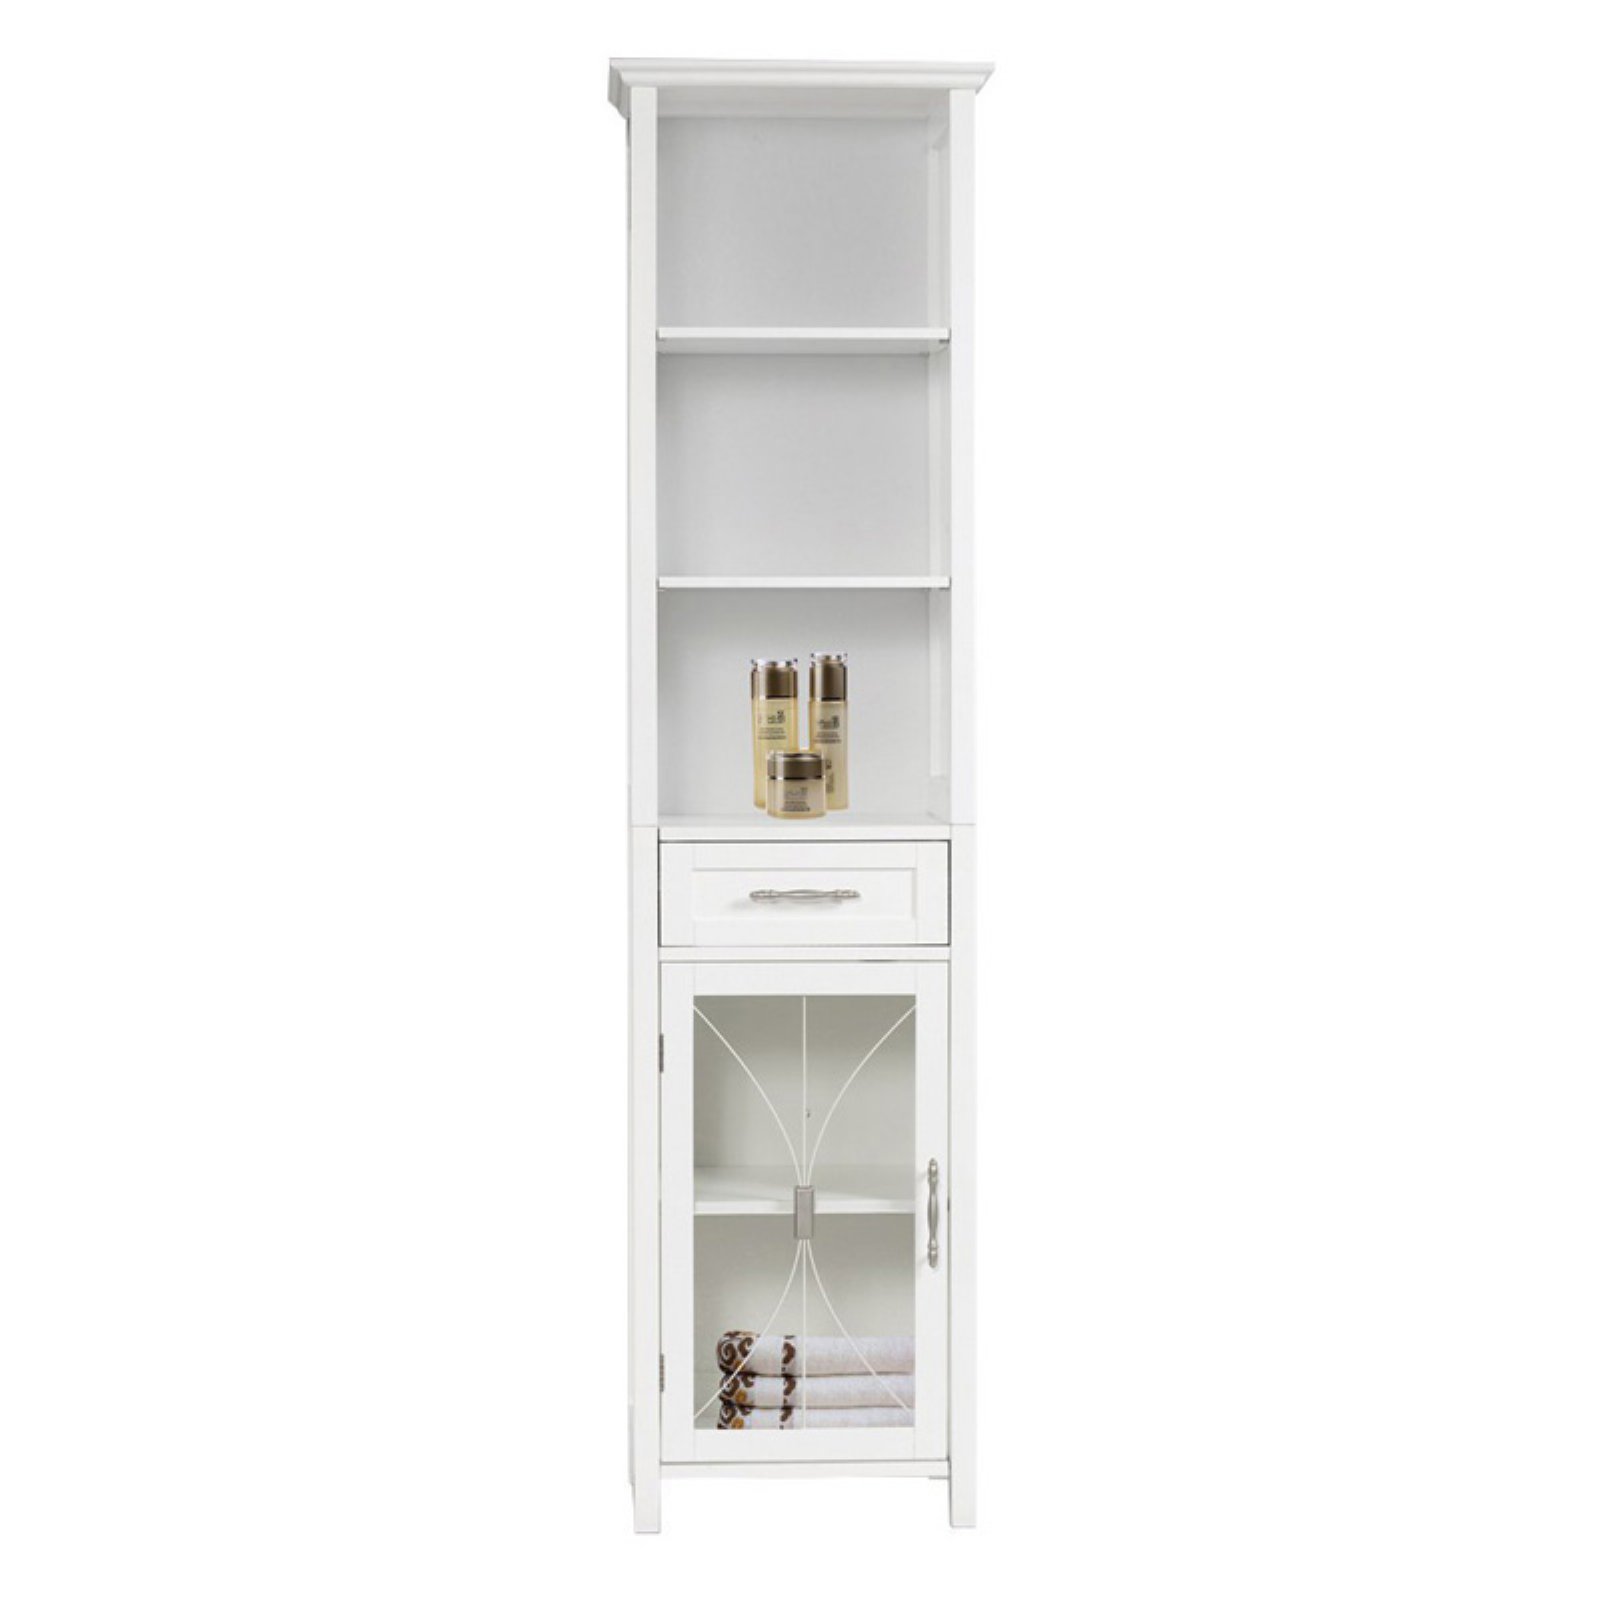 Teamson Home Delaney Wooden Linen Cabinet with Drawer and Open Shelves, White - image 1 of 6